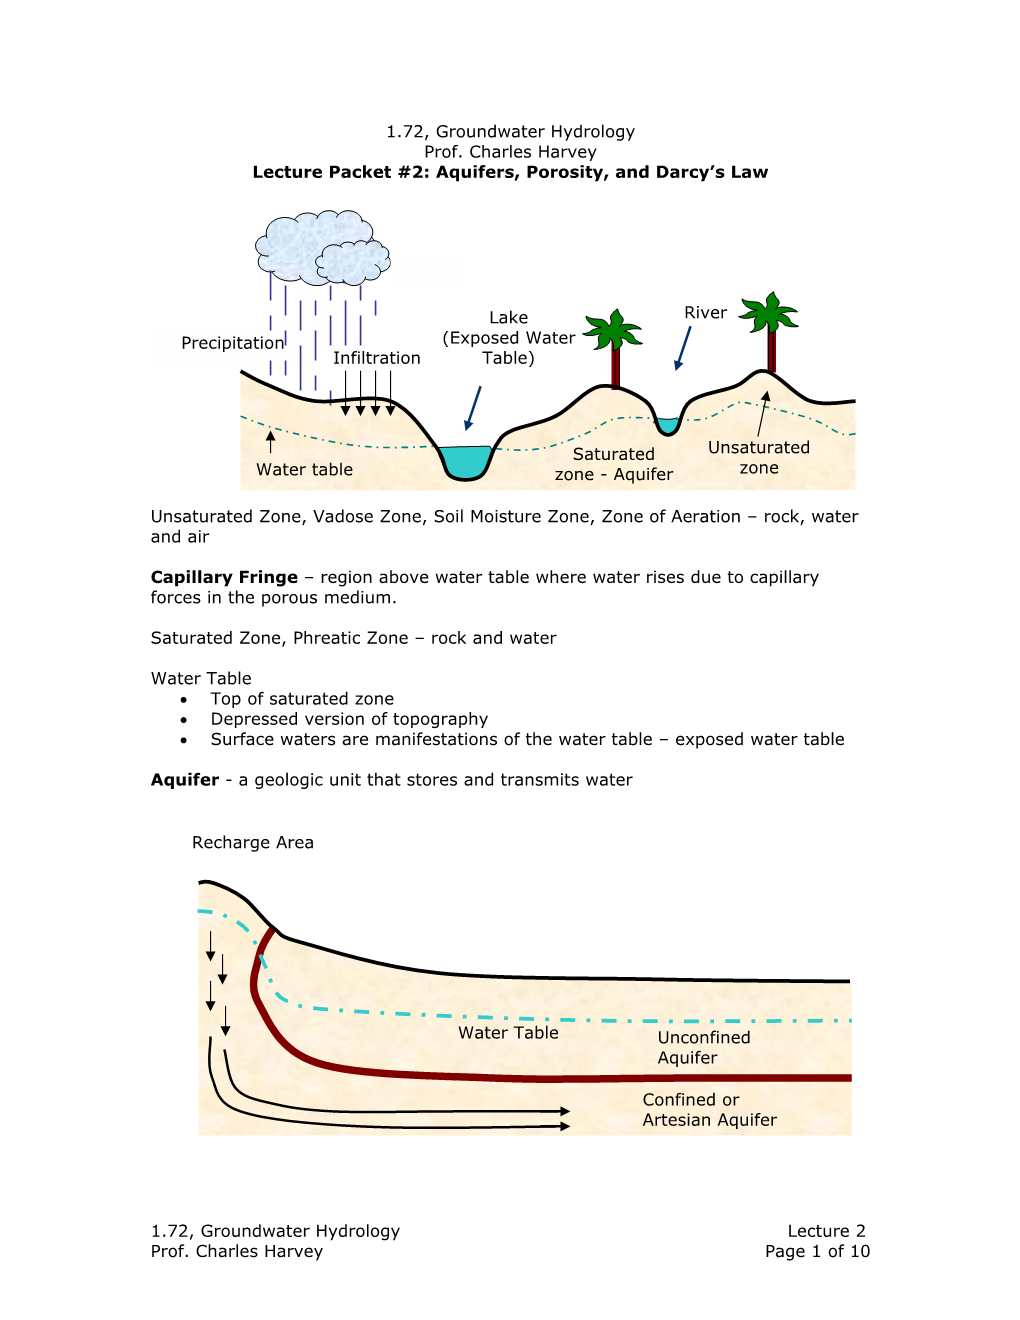 1.72, Groundwater Hydrology Prof. Charles Harvey Lecture Packet #2: Aquifers, Porosity, and Darcy’S Law